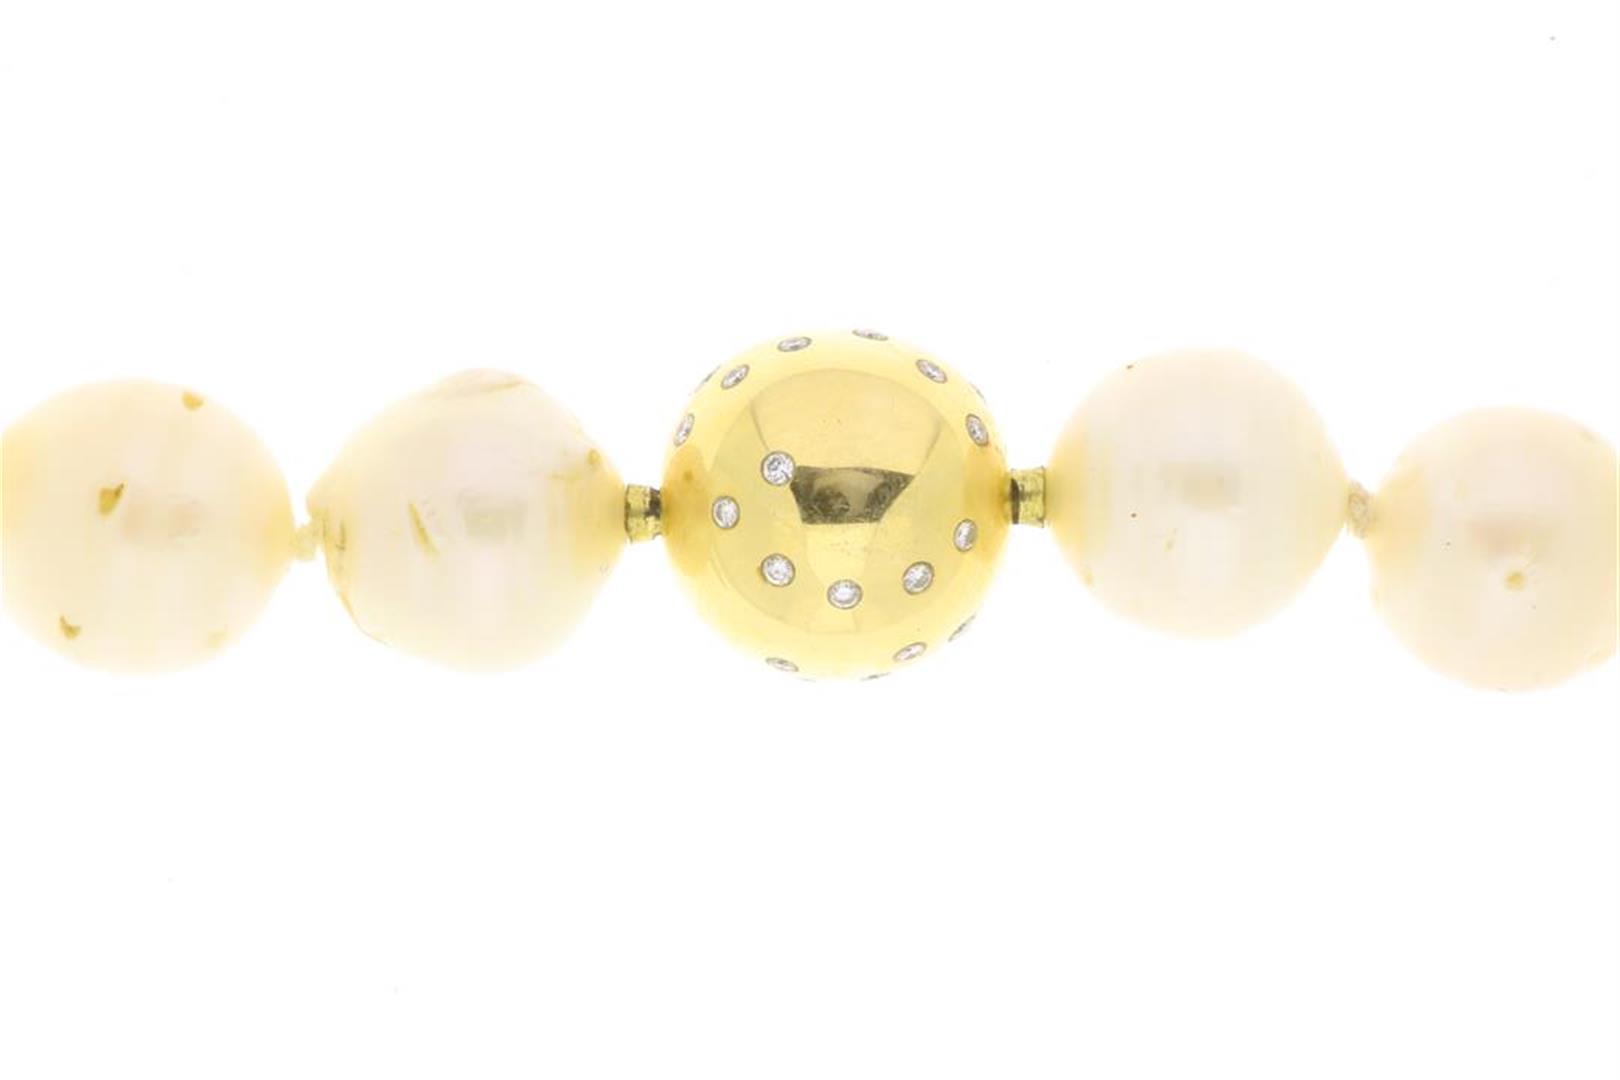 Pearl necklace with gold ball clasp set with diamonds. To be judged by a jewelry expert.